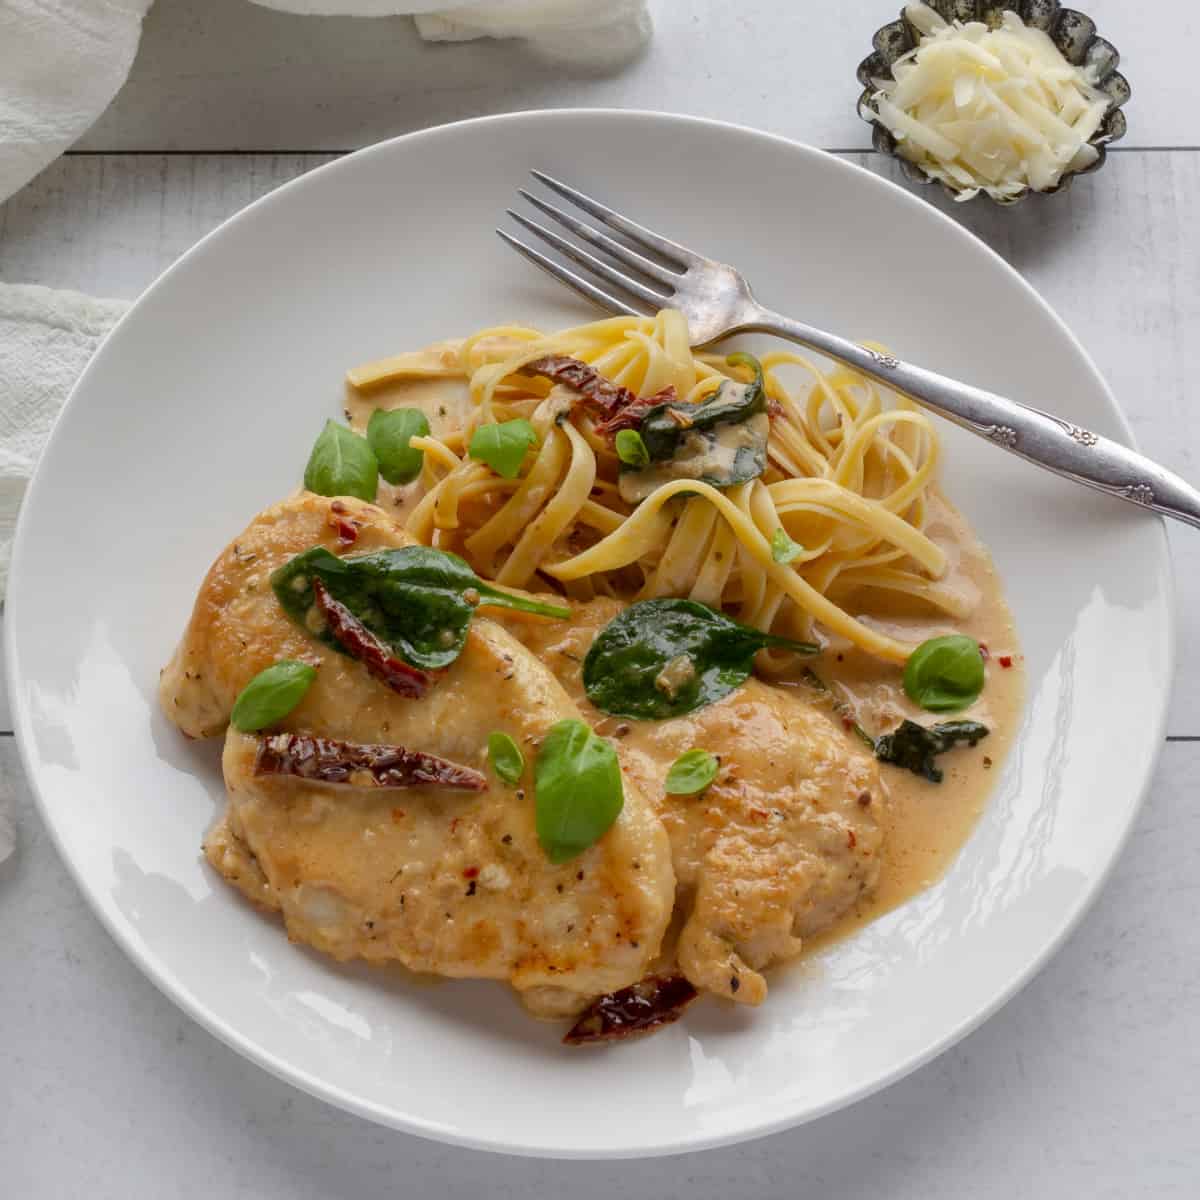 Chicken cutlets in a creamy spinach and tomato sauce.